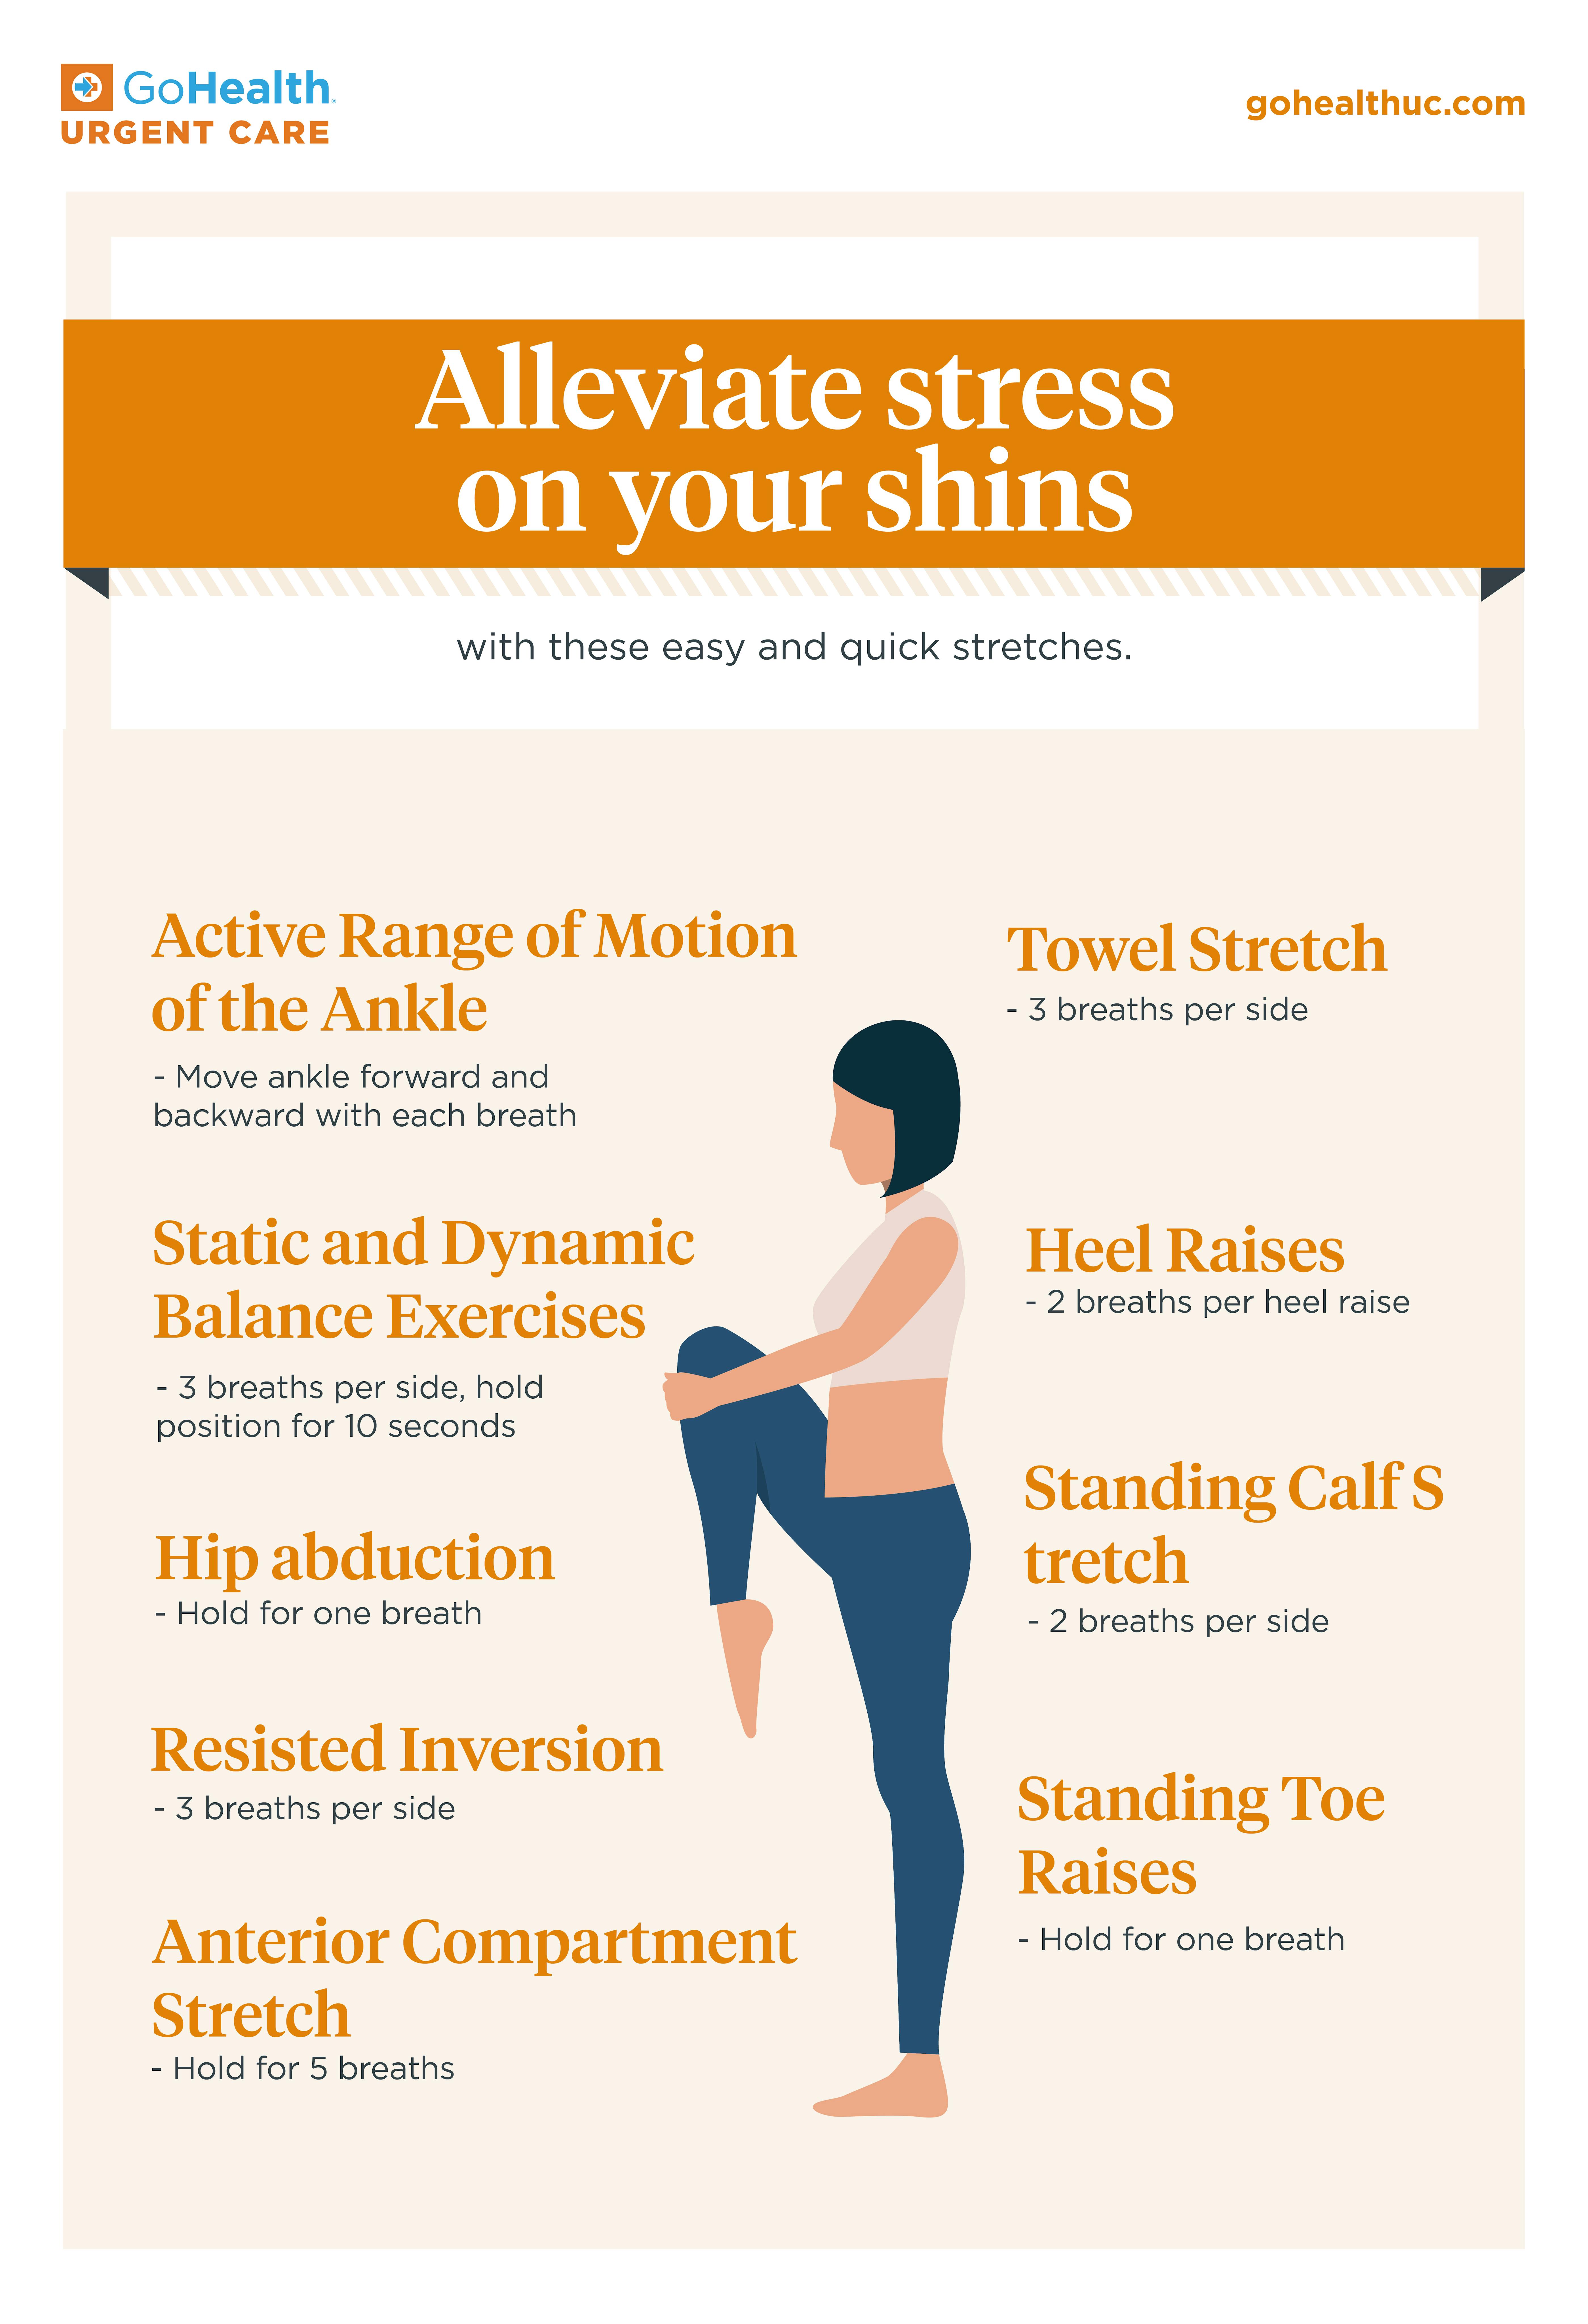 Shin Splint stretches for prevention and treatment